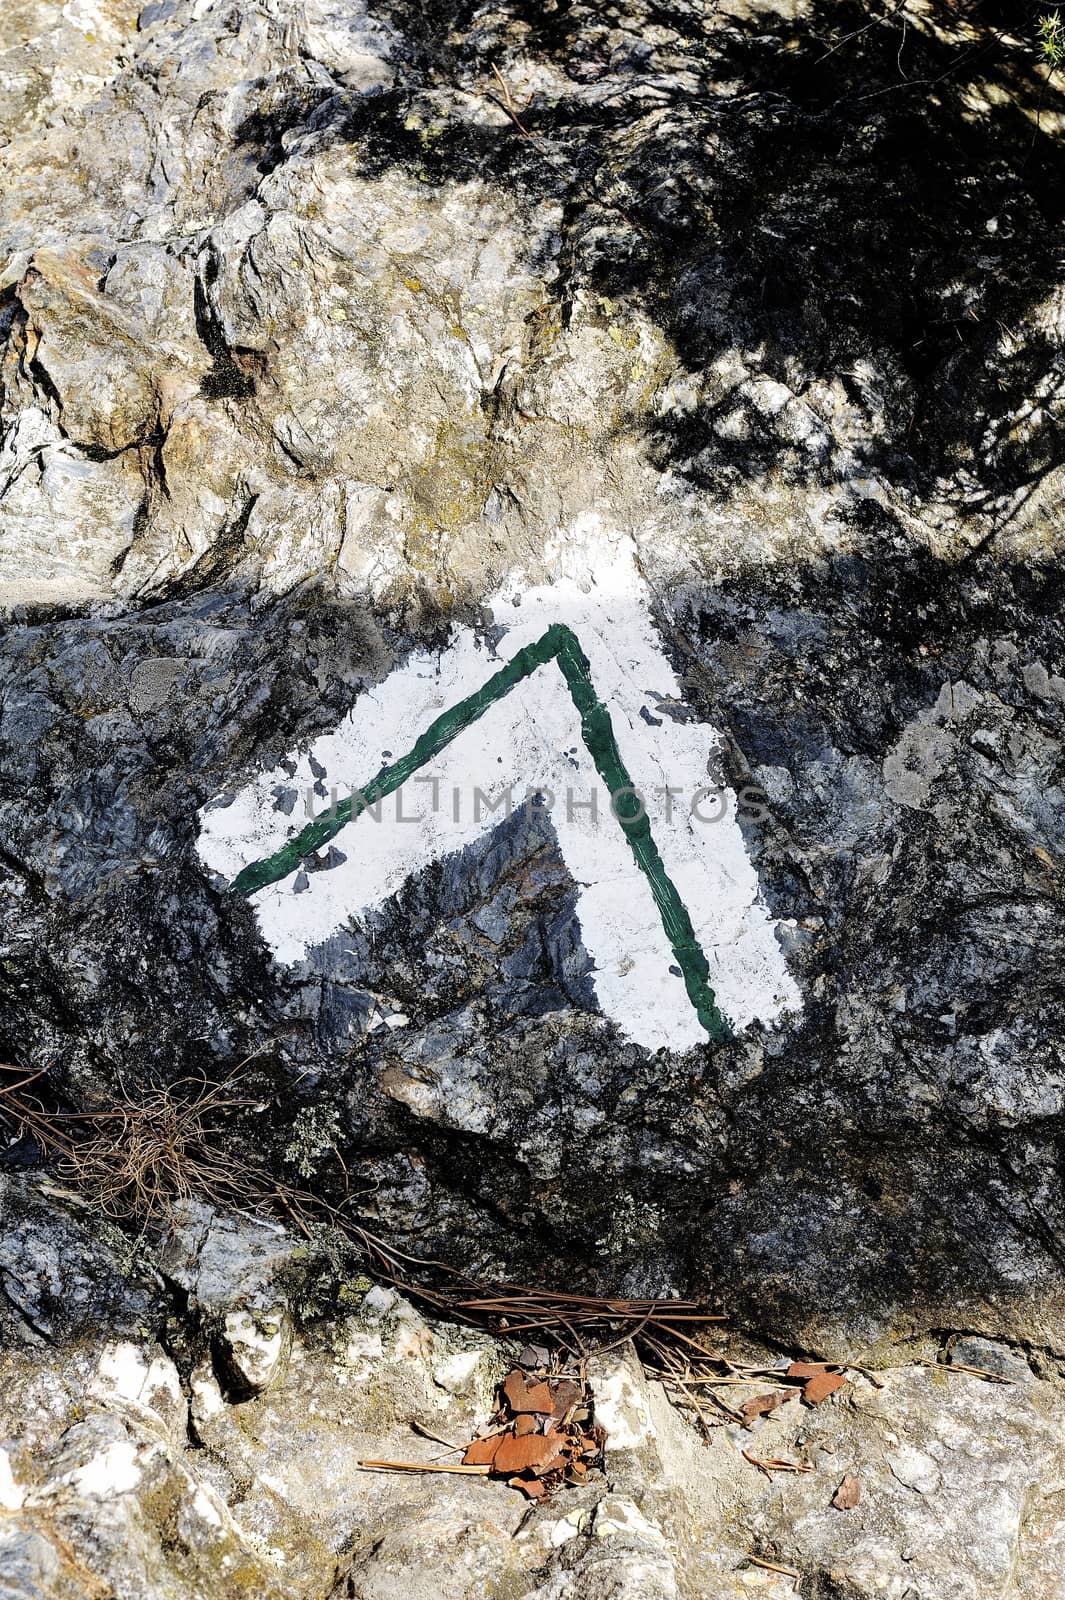 Tagging hiking path to the green and white paint on the ground on a rock.